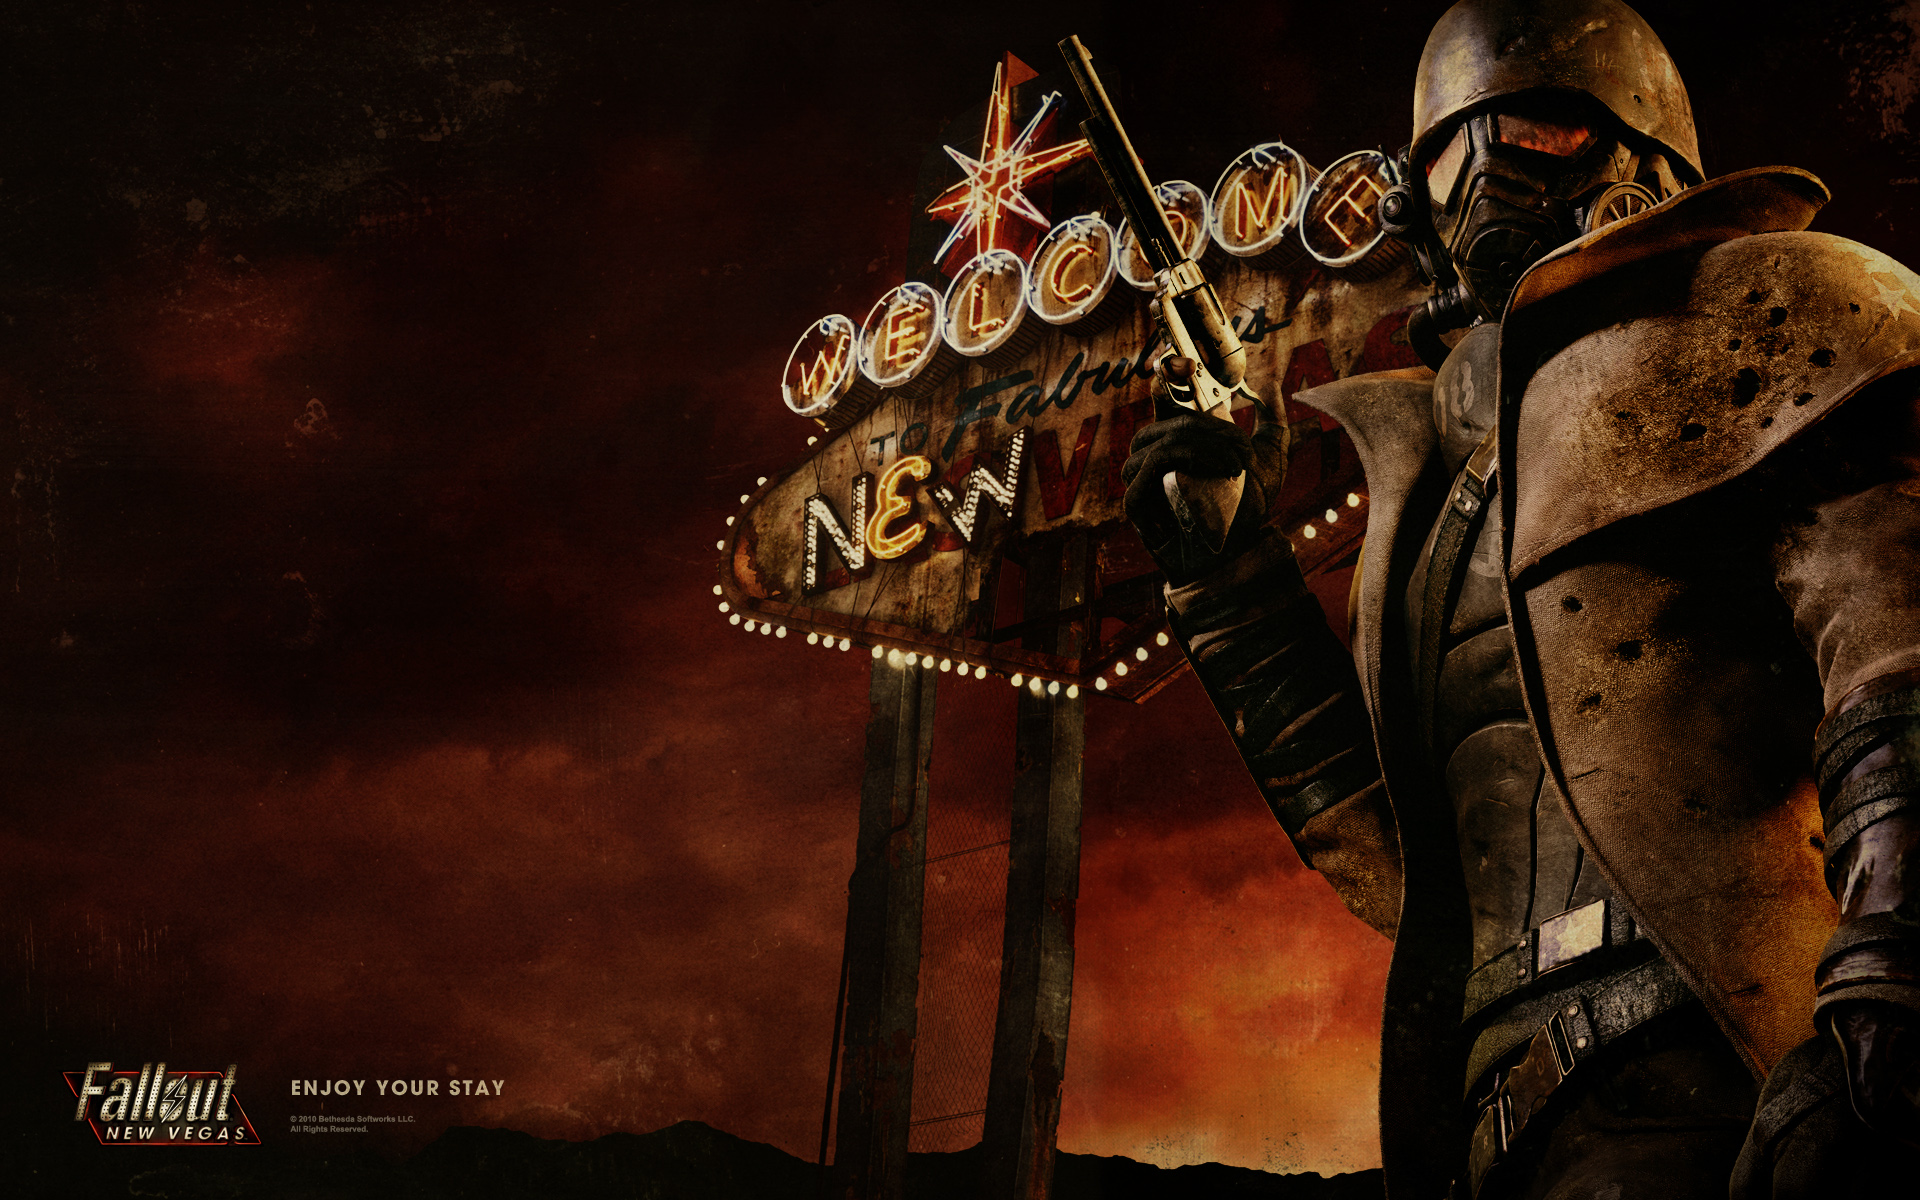 Fallout Vegas Background Game Nature Background Video Desktop Cool